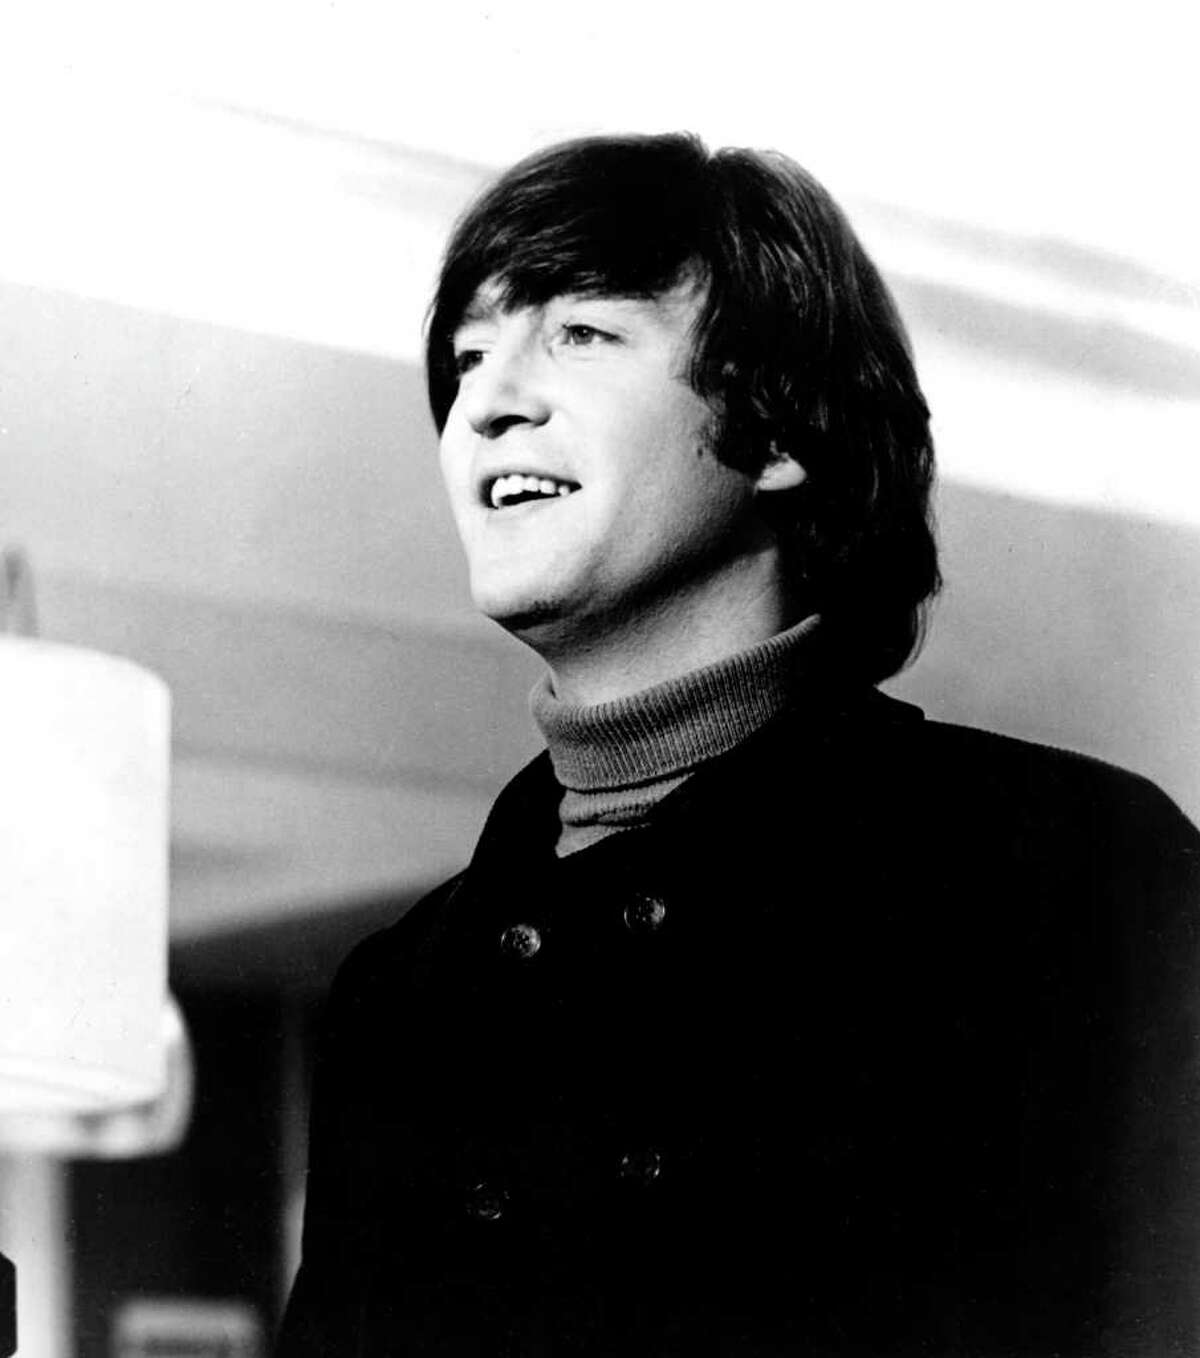 Beatle John Lennon is shown in this 1965 photo at an unknown location. (AP Photo)